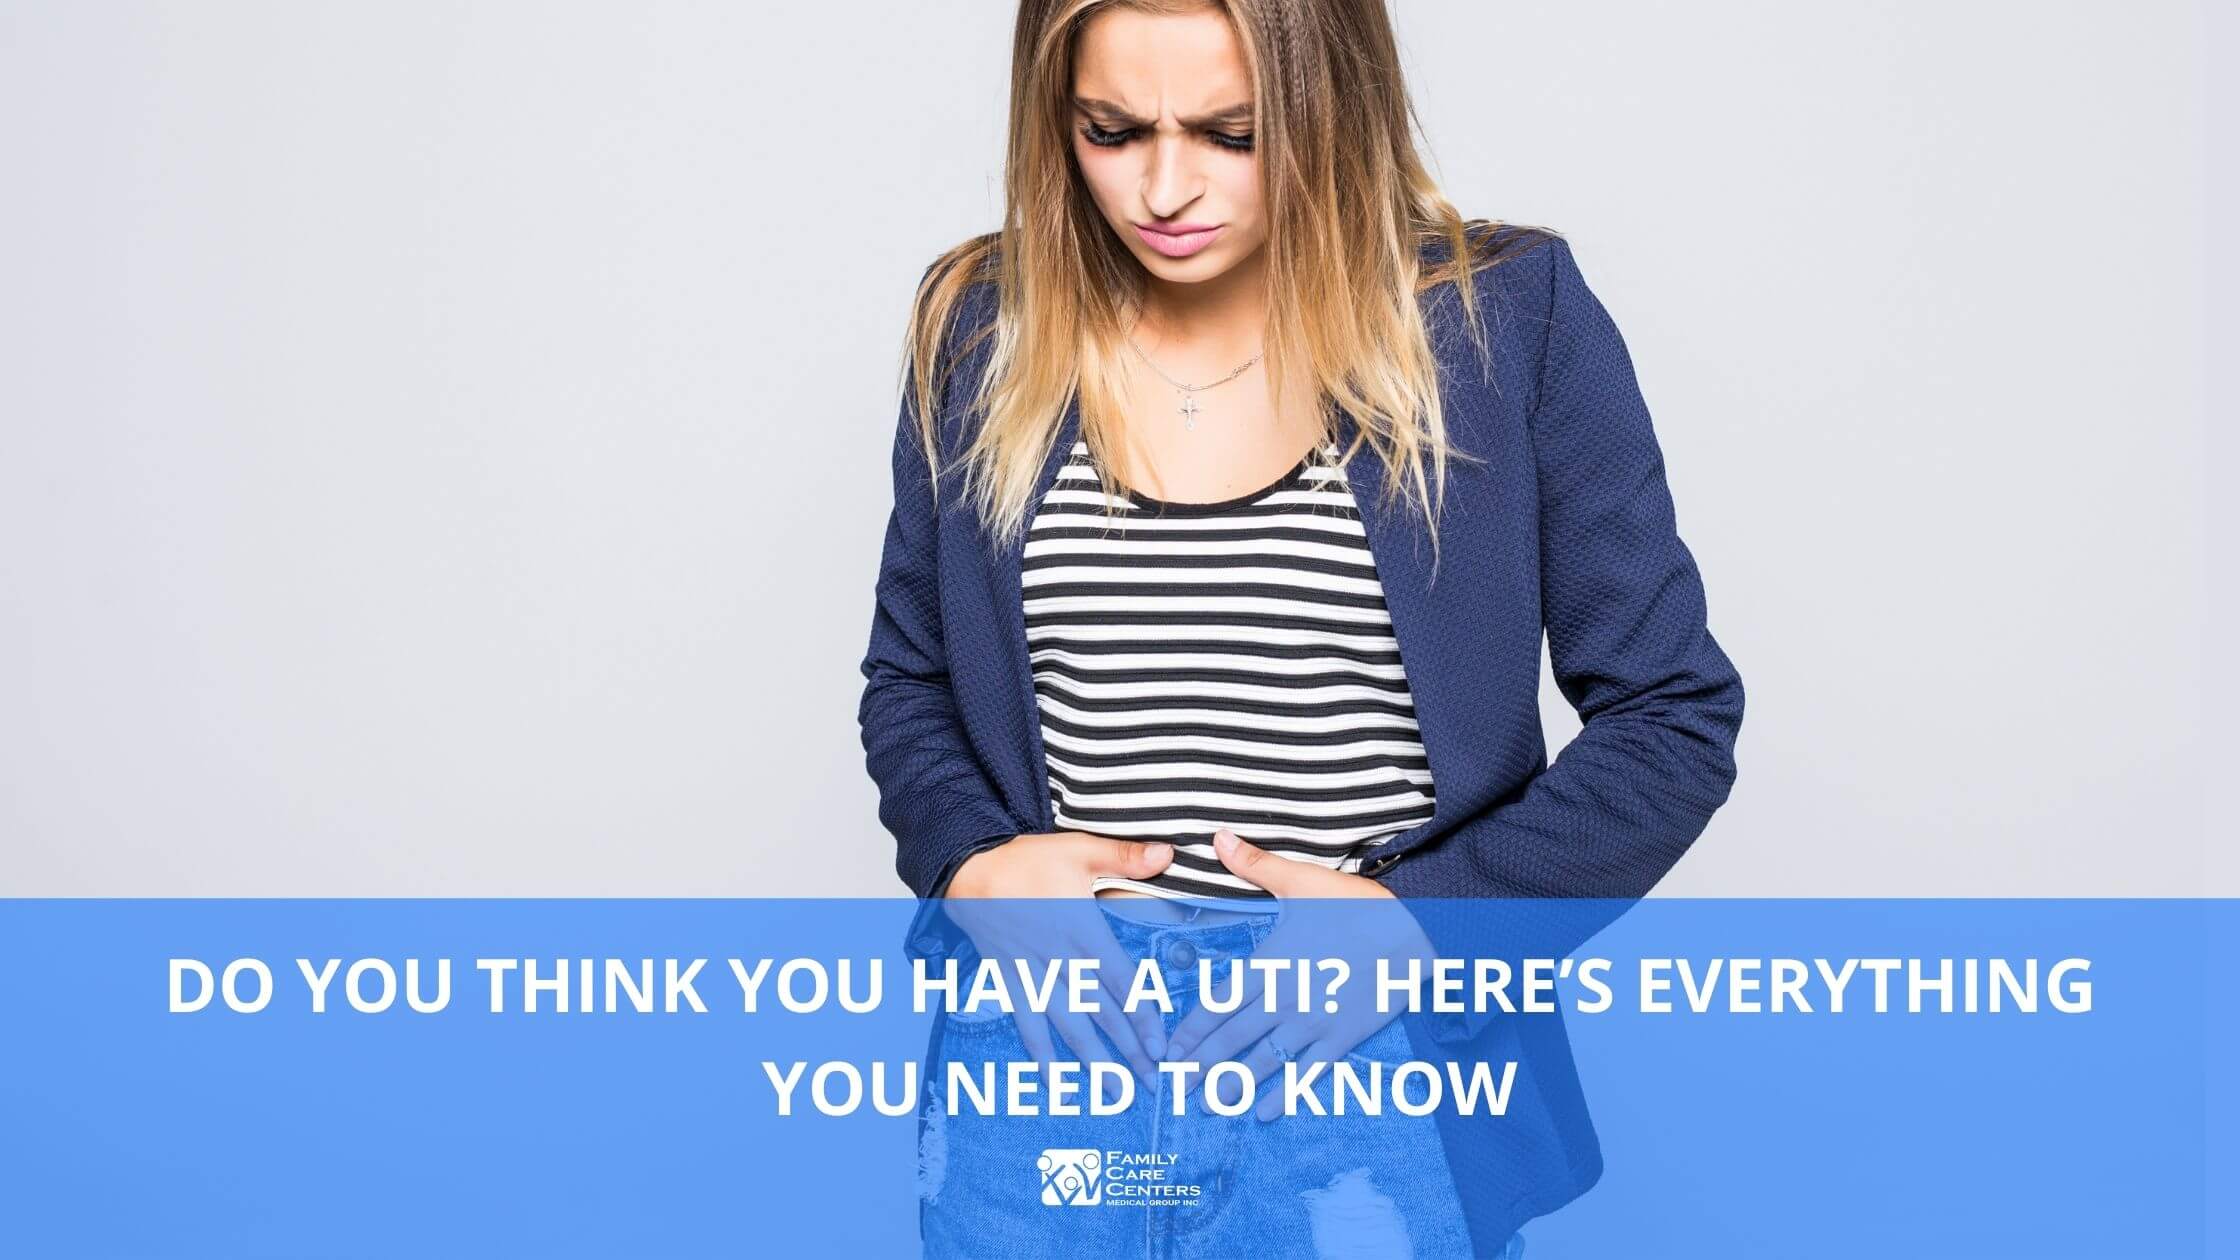 Do You Think You Have a UTI? Here’s Everything You Need to Know